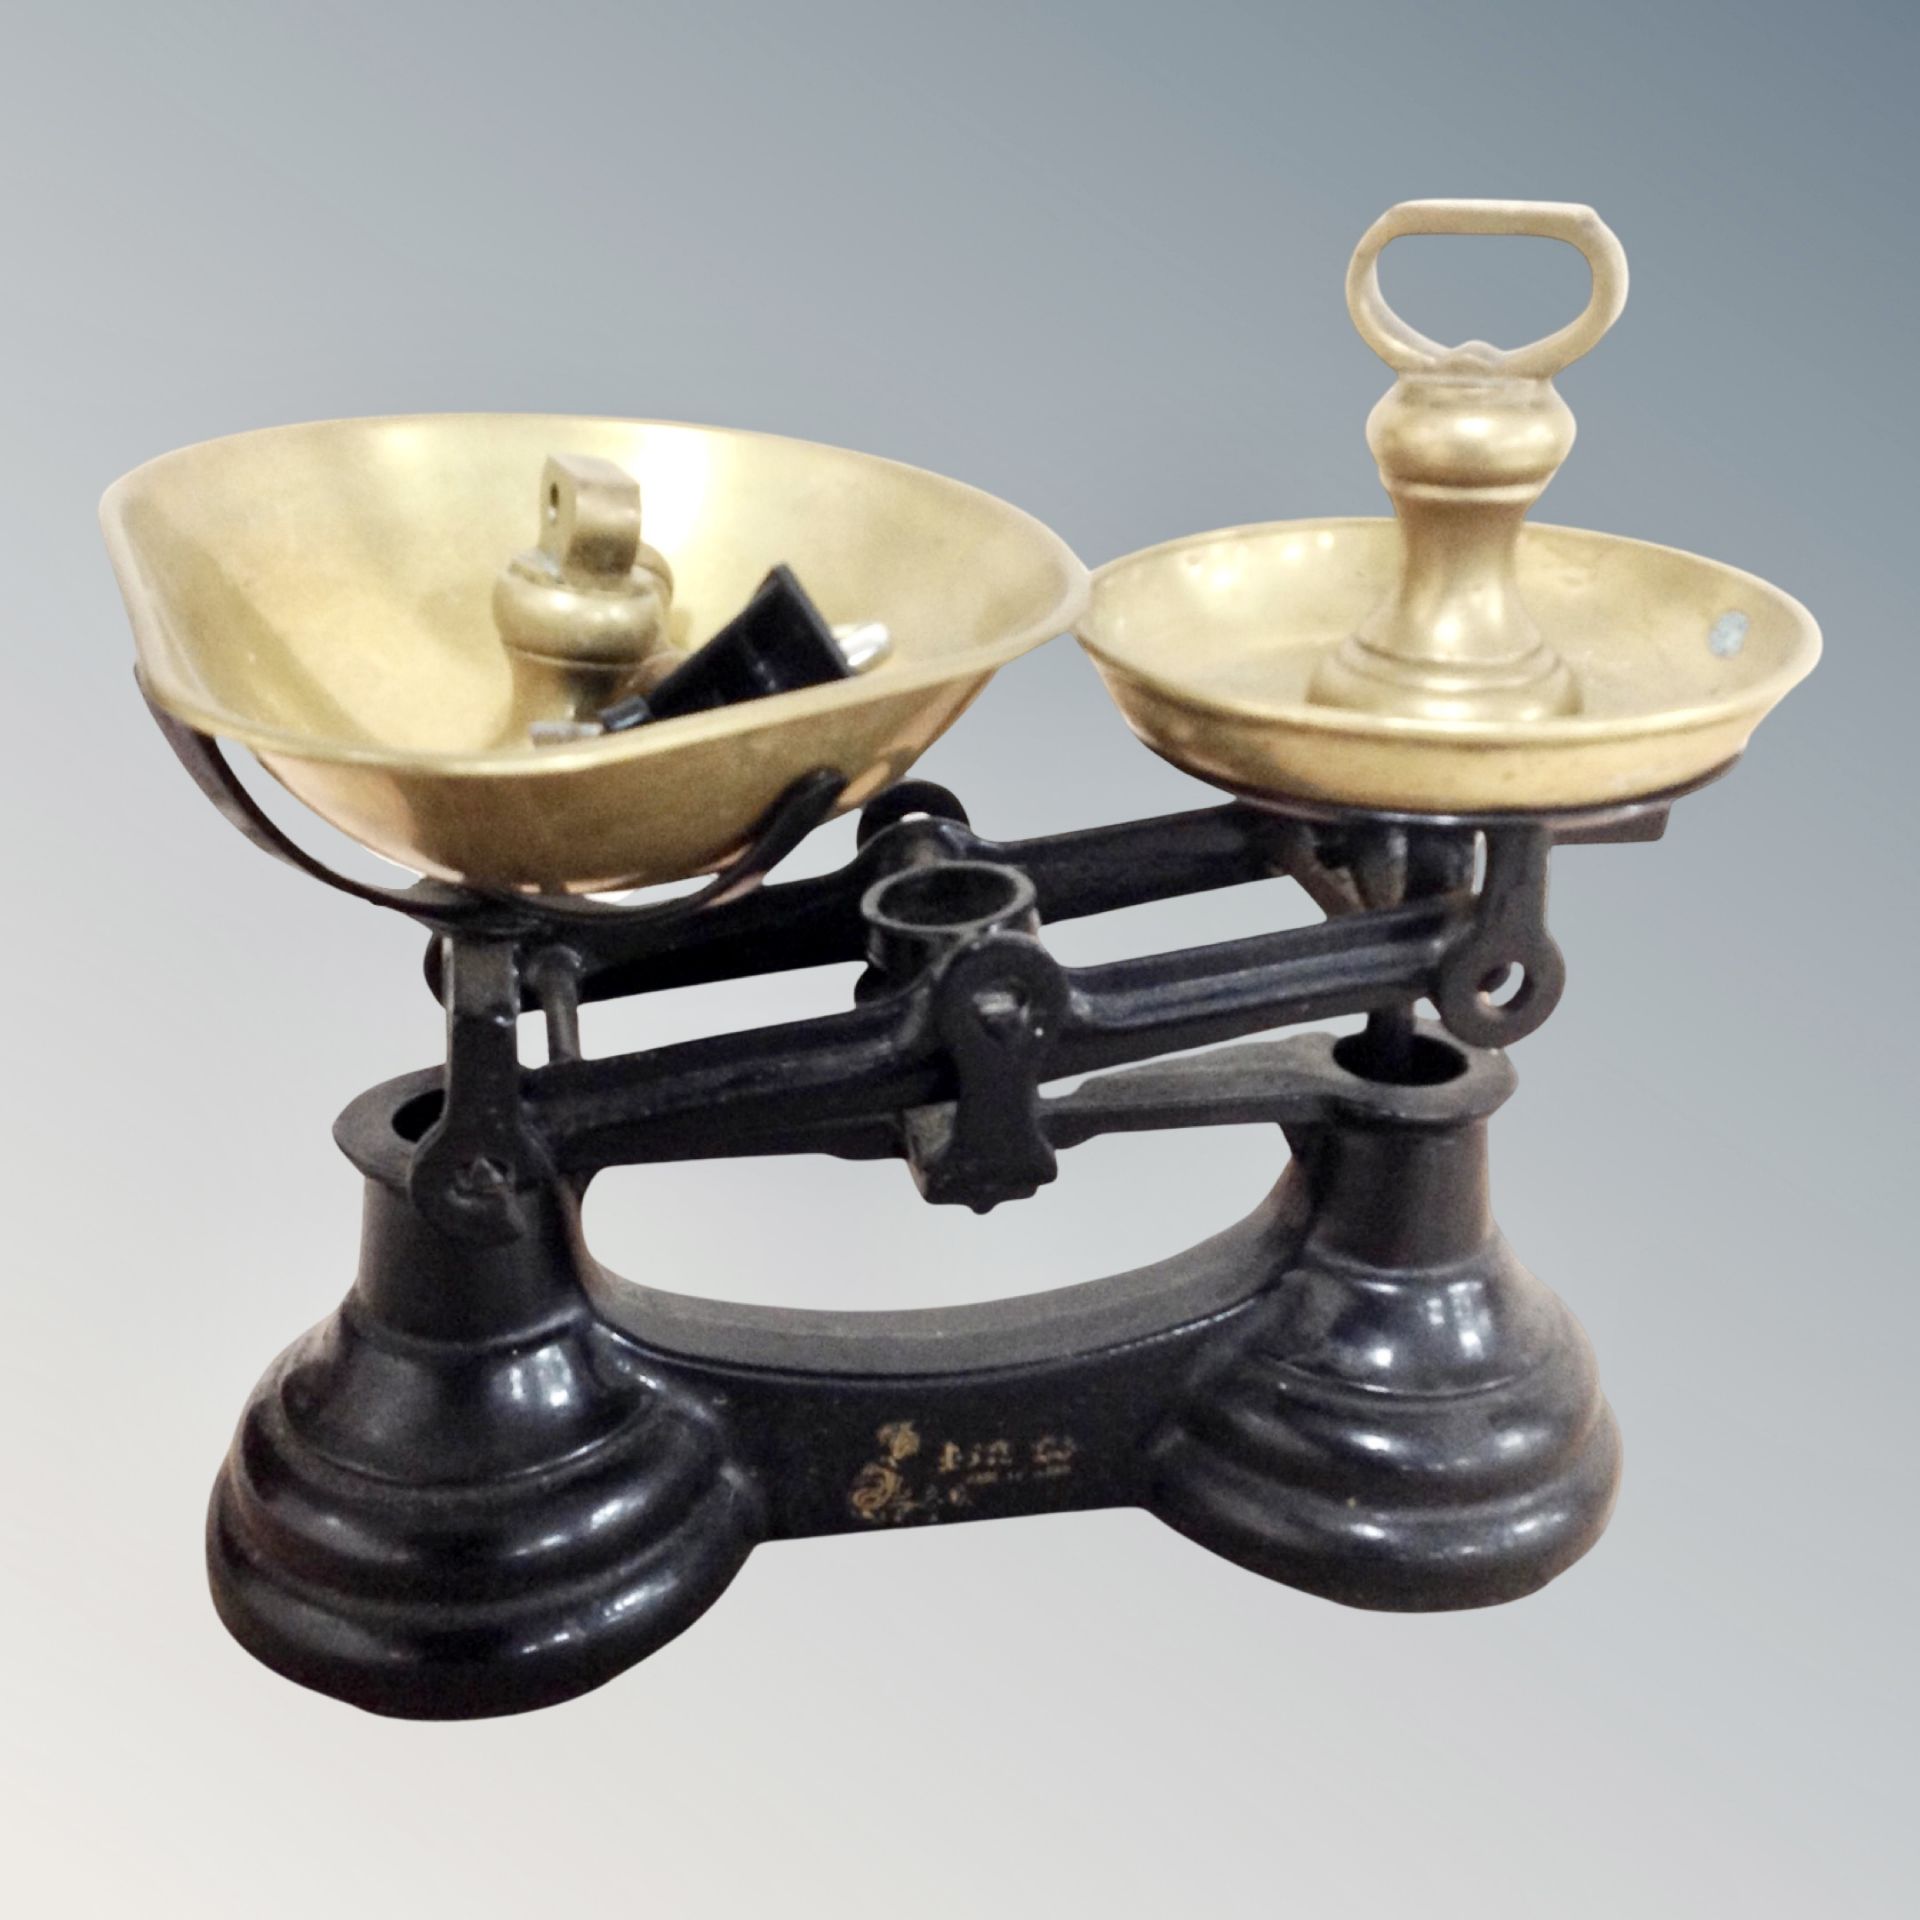 Set of antique kitchen scales with brass weights